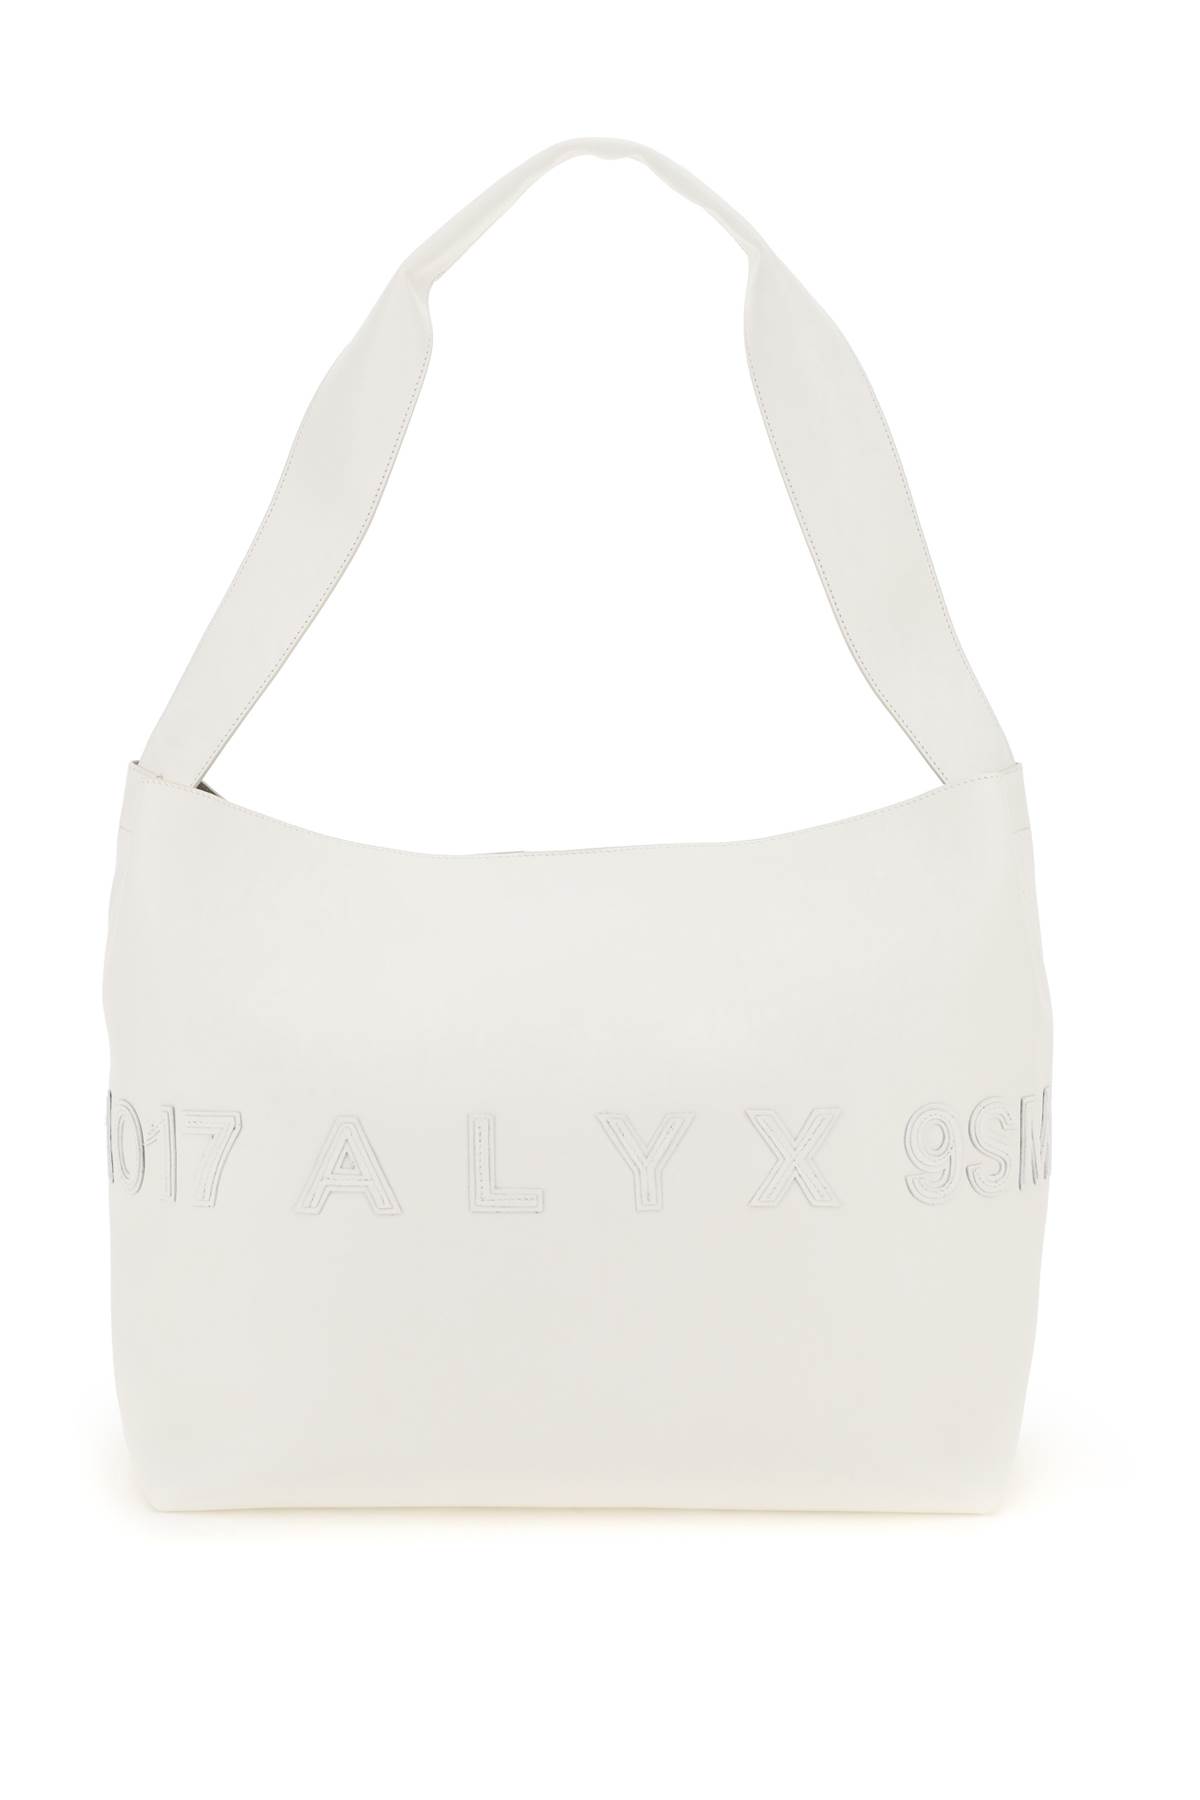 1017 ALYX 9SM constellation Leather Tote Bag